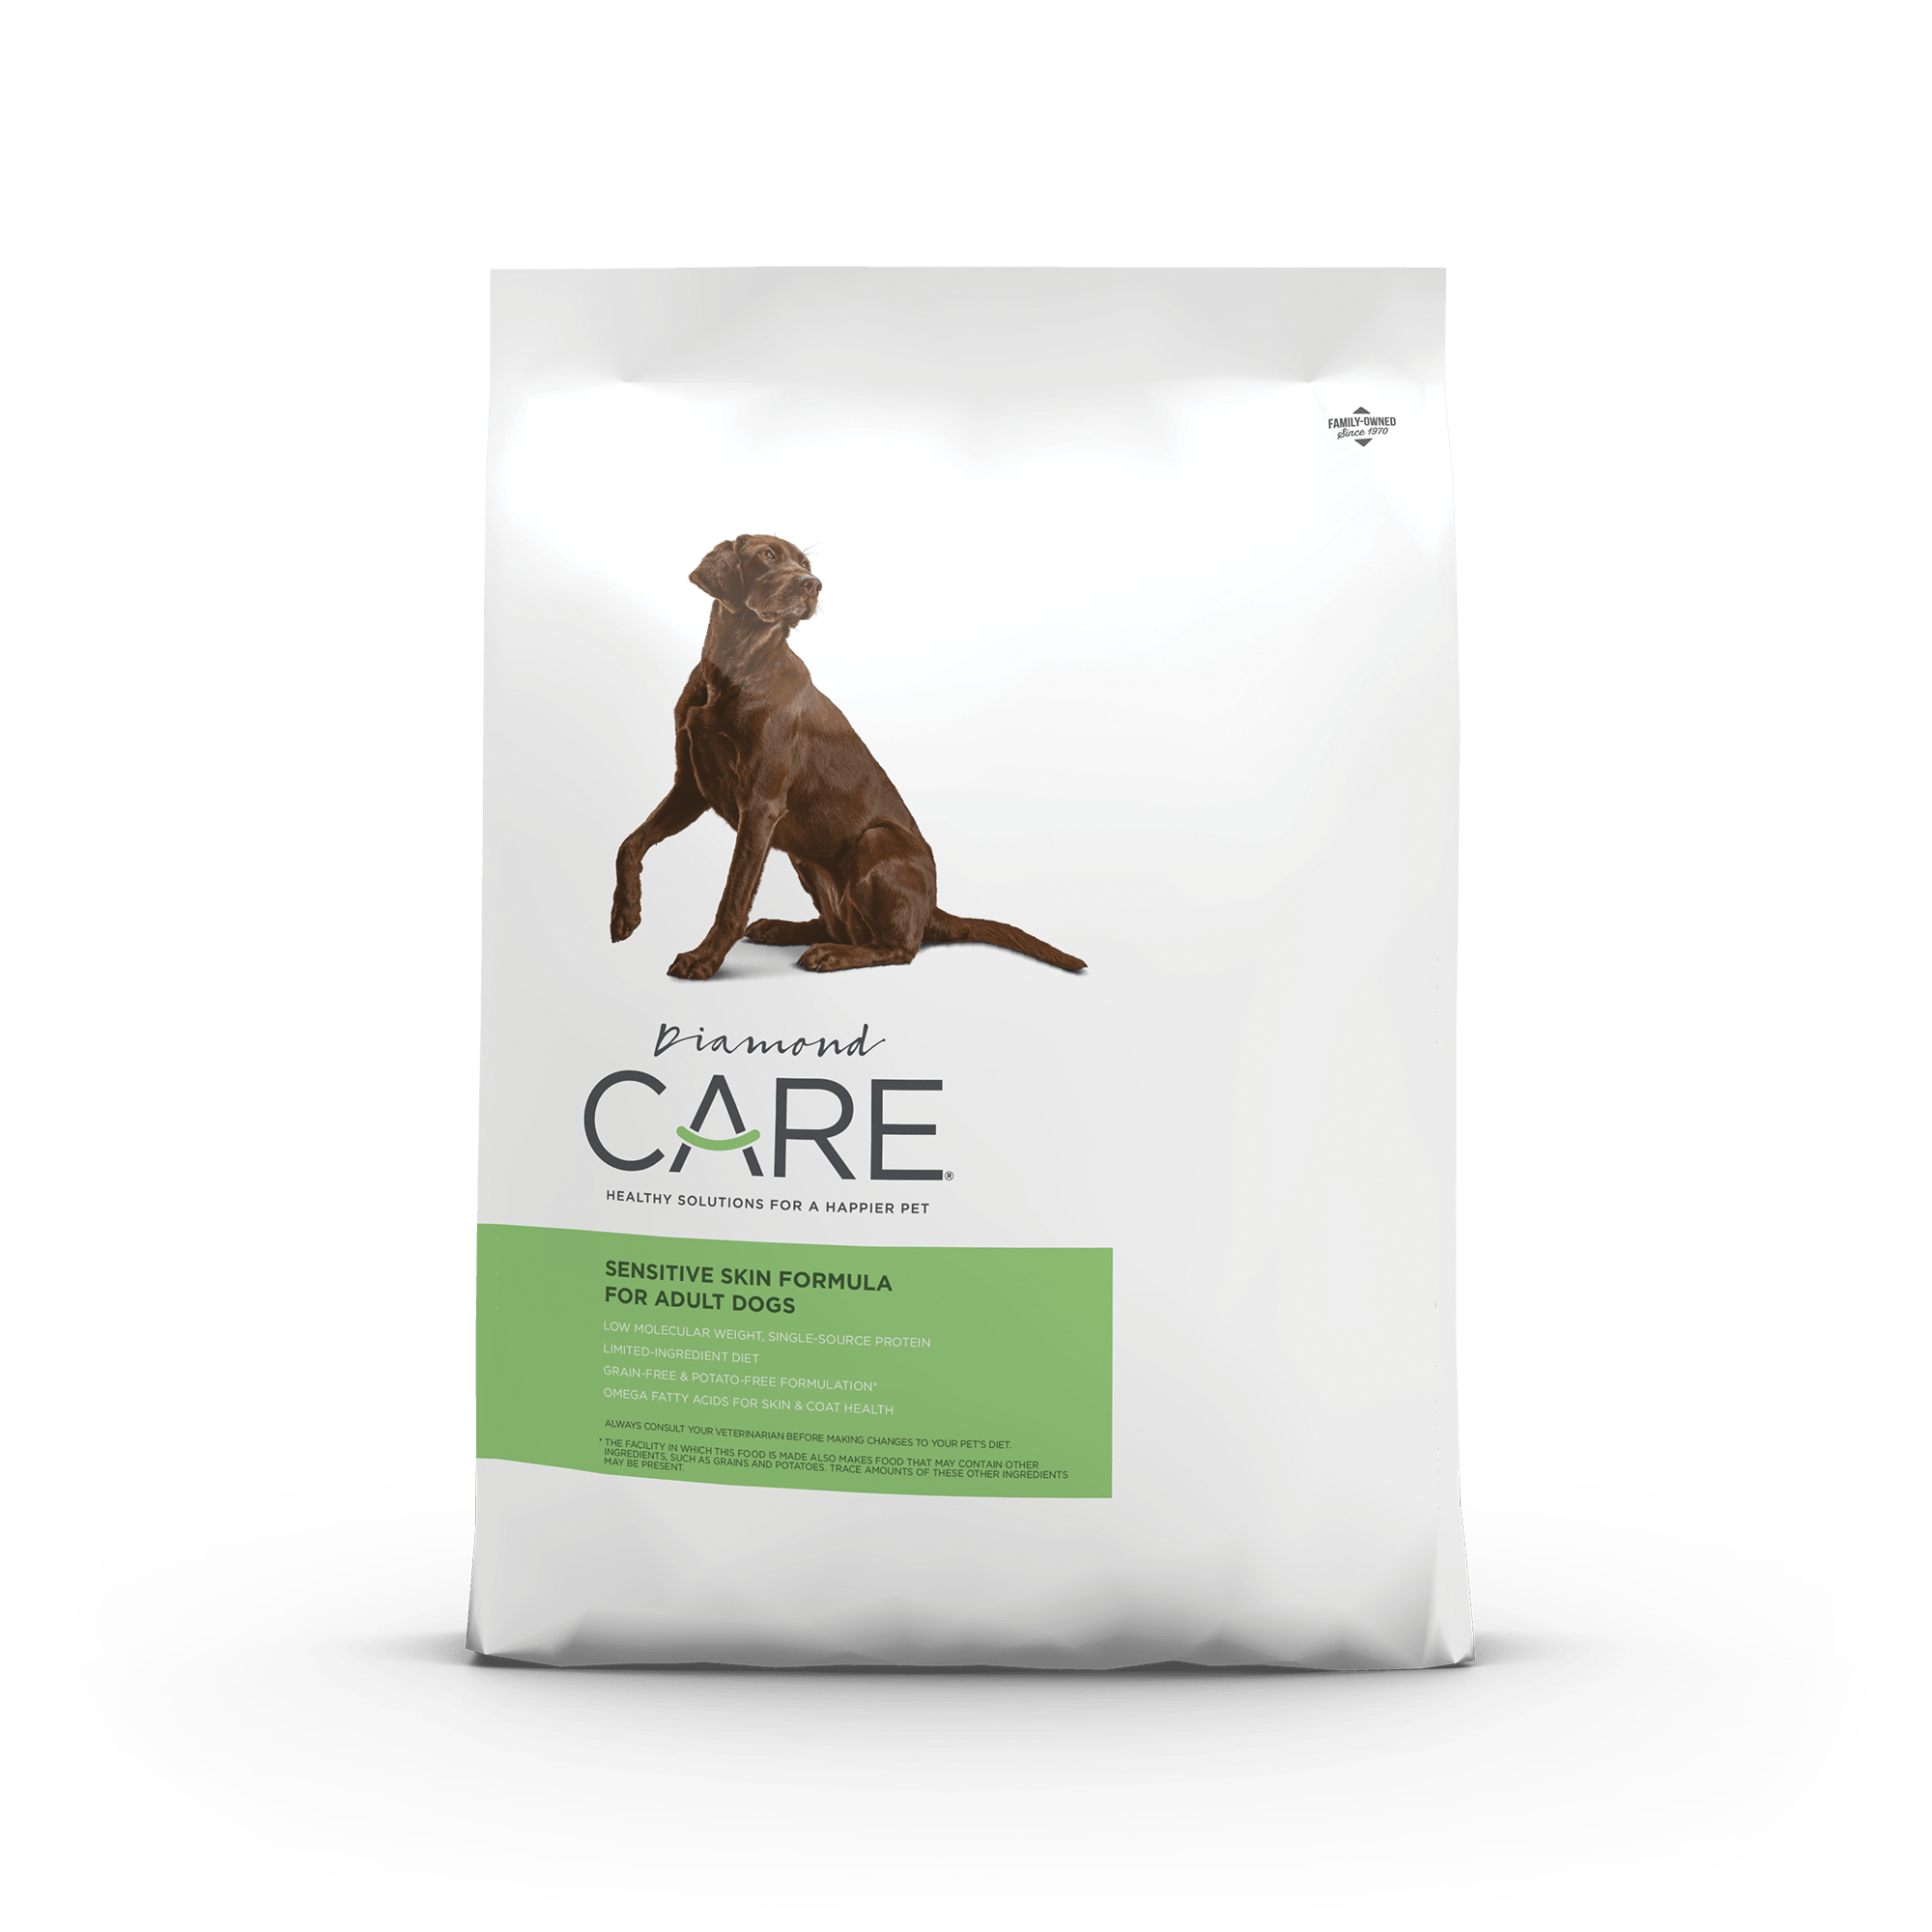 Diamond CARE Sensitive Skin Formula for Adult Dogs product packaging